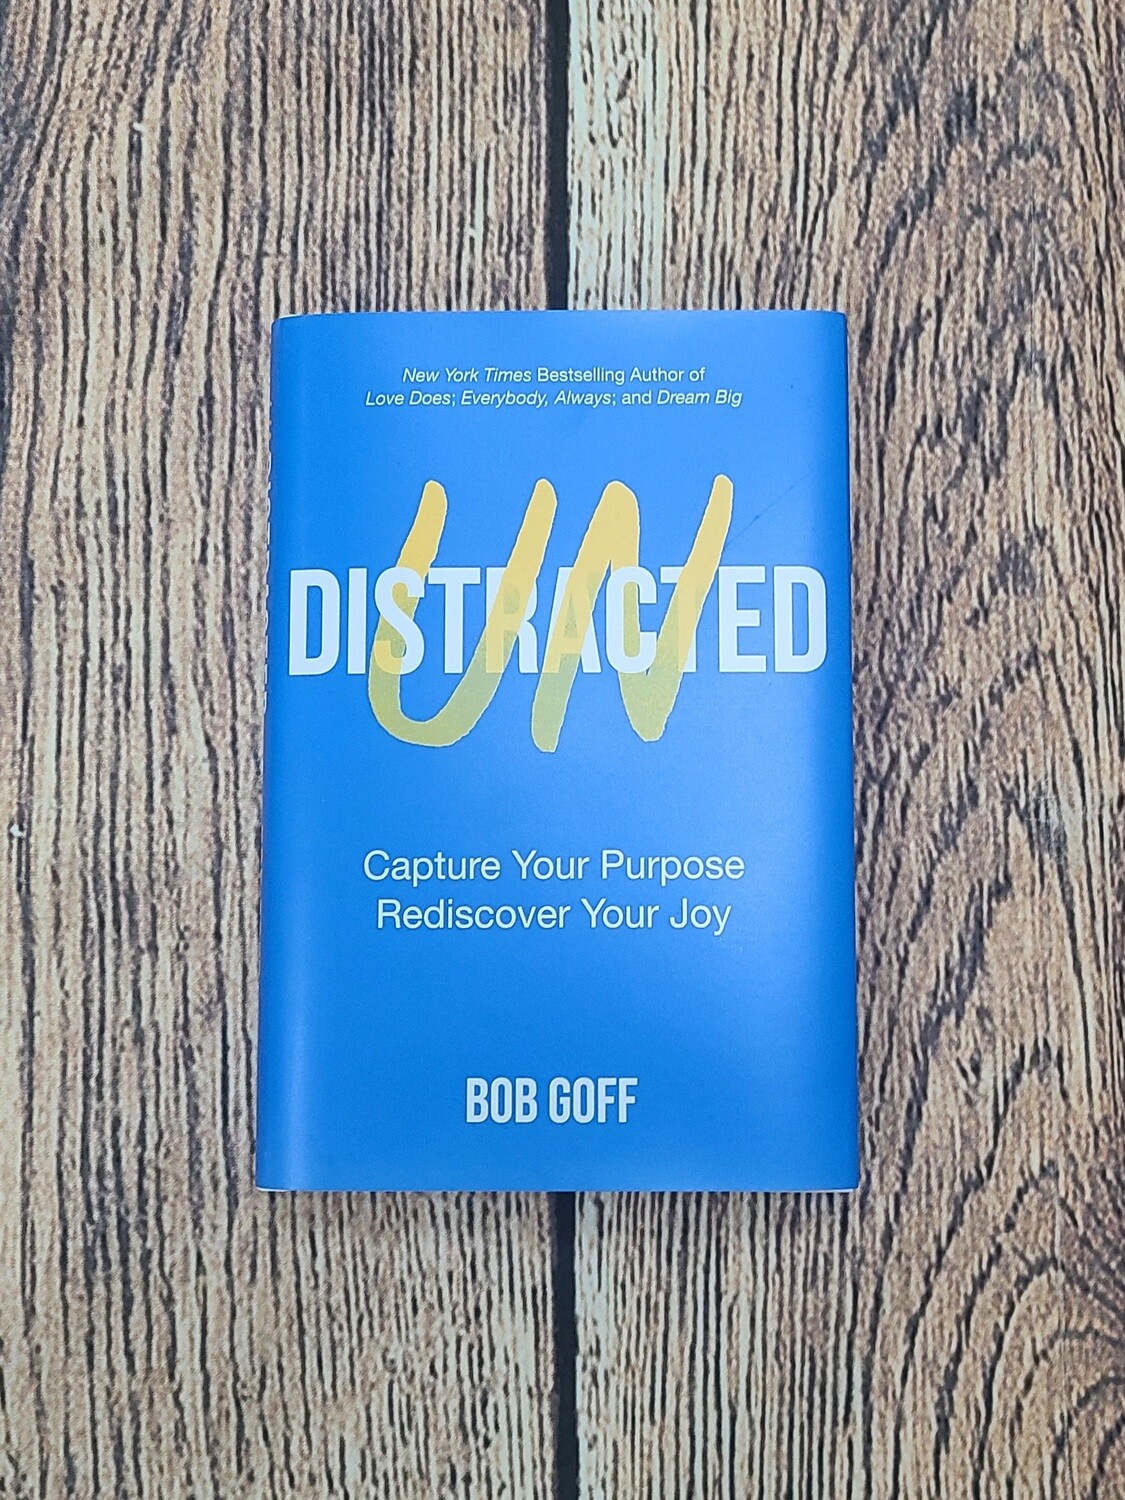 Undistracted: Capture Your Purpose Rediscover Your Joy by Bob Goff